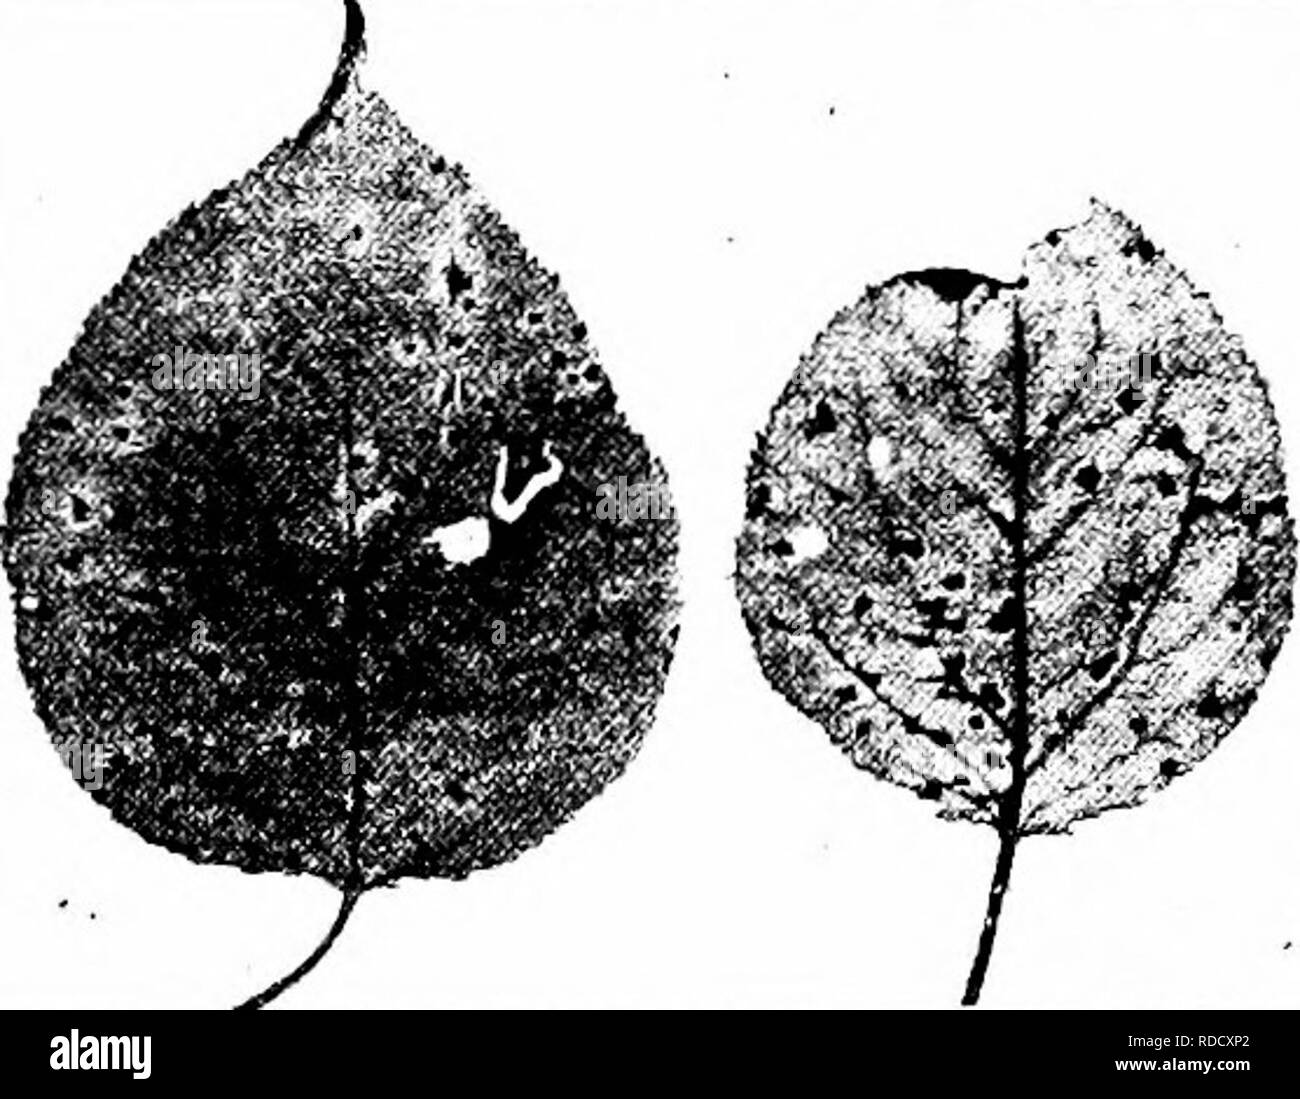 . Manual of fruit diseases . Fruit. Fig. 41. — Coryneum-blight disease on apricot fruits.. Fig. 42. - Coryneum-blight disease on apricot leaves. been recorded from Australia as early as 1882, and an epiphytotic was reported from Algeria in 1904. Small, reddish spots at first with light centers then becoming dark-green to black, are produced on the fruits (Fig. 41). The foliage is spotted; the affected areas are brown, but soon these fall away, leaving a shot-hole effect in the leaf (Fig. 42). Fruit-buds are sometimes killed as a result. Please note that these images are extracted from scanned  Stock Photo